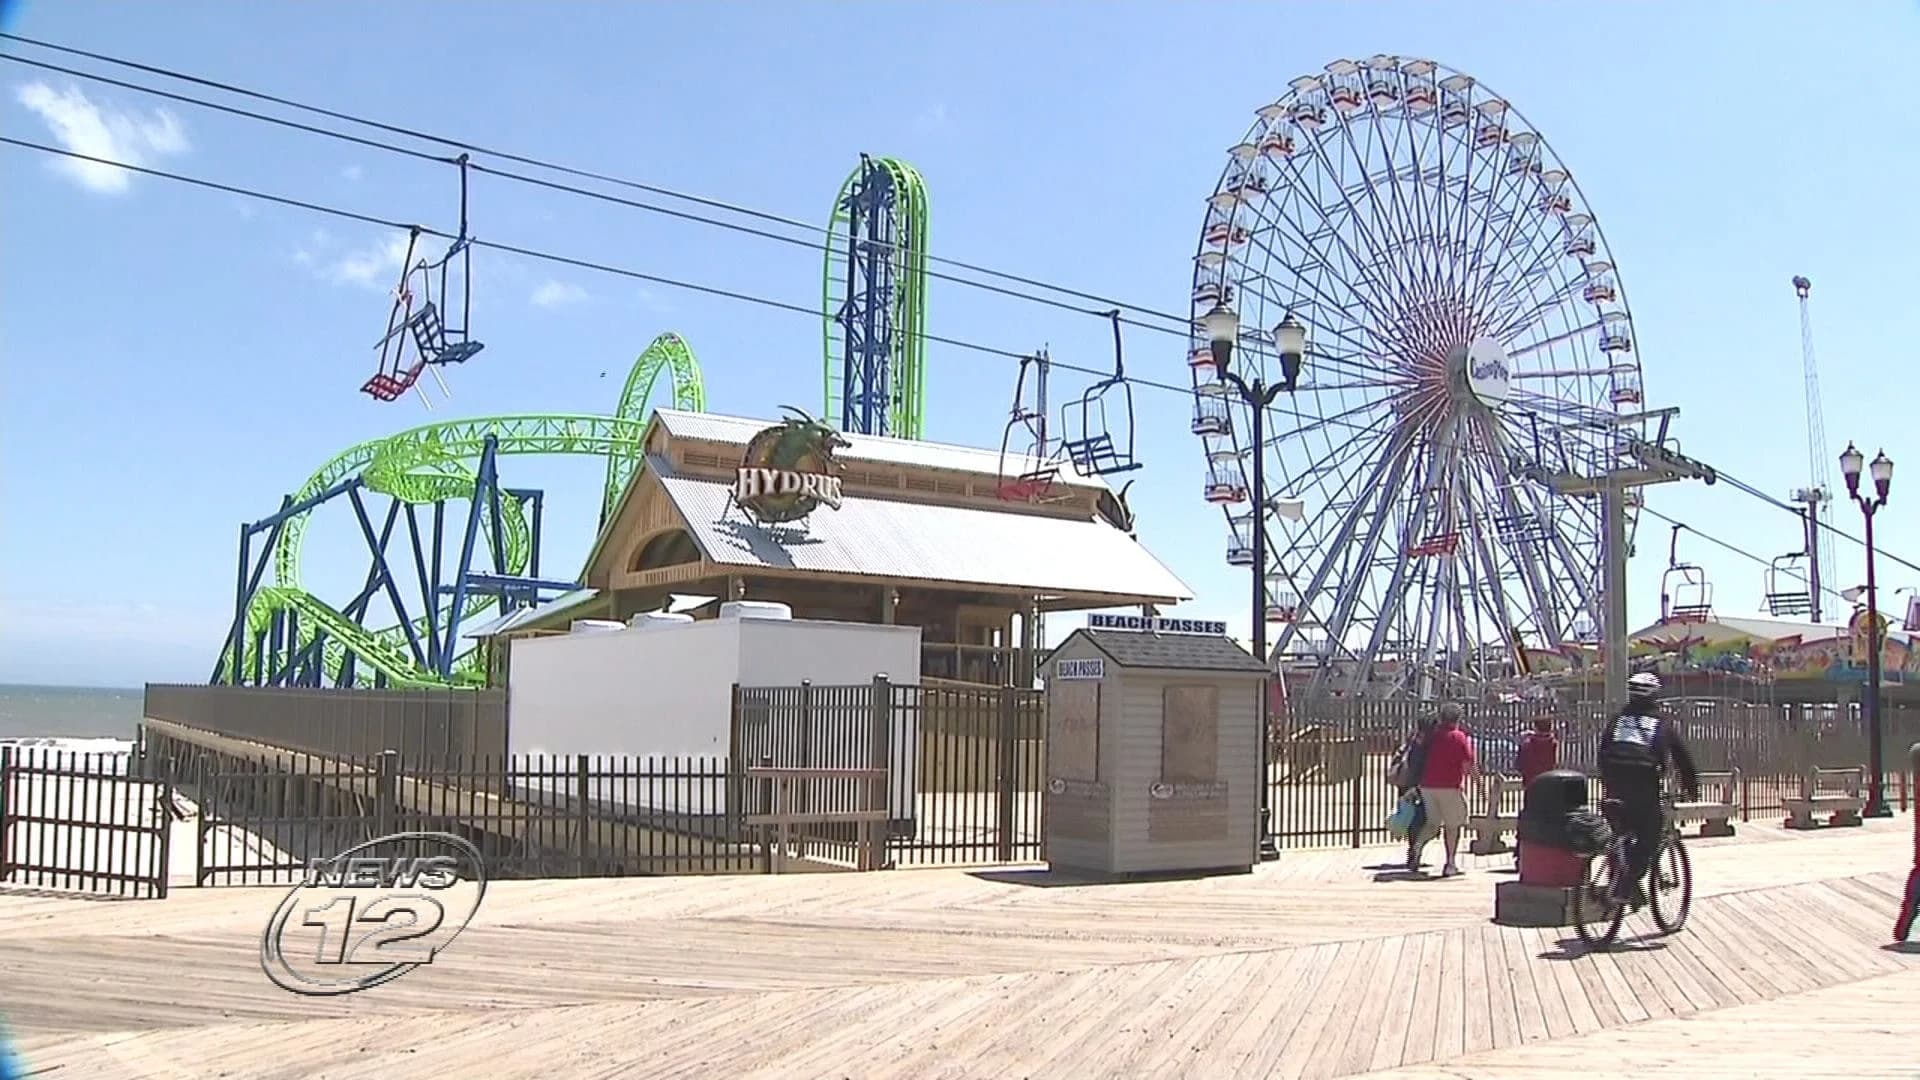 New rollercoaster revitalizes once storm-battered Seaside Heights